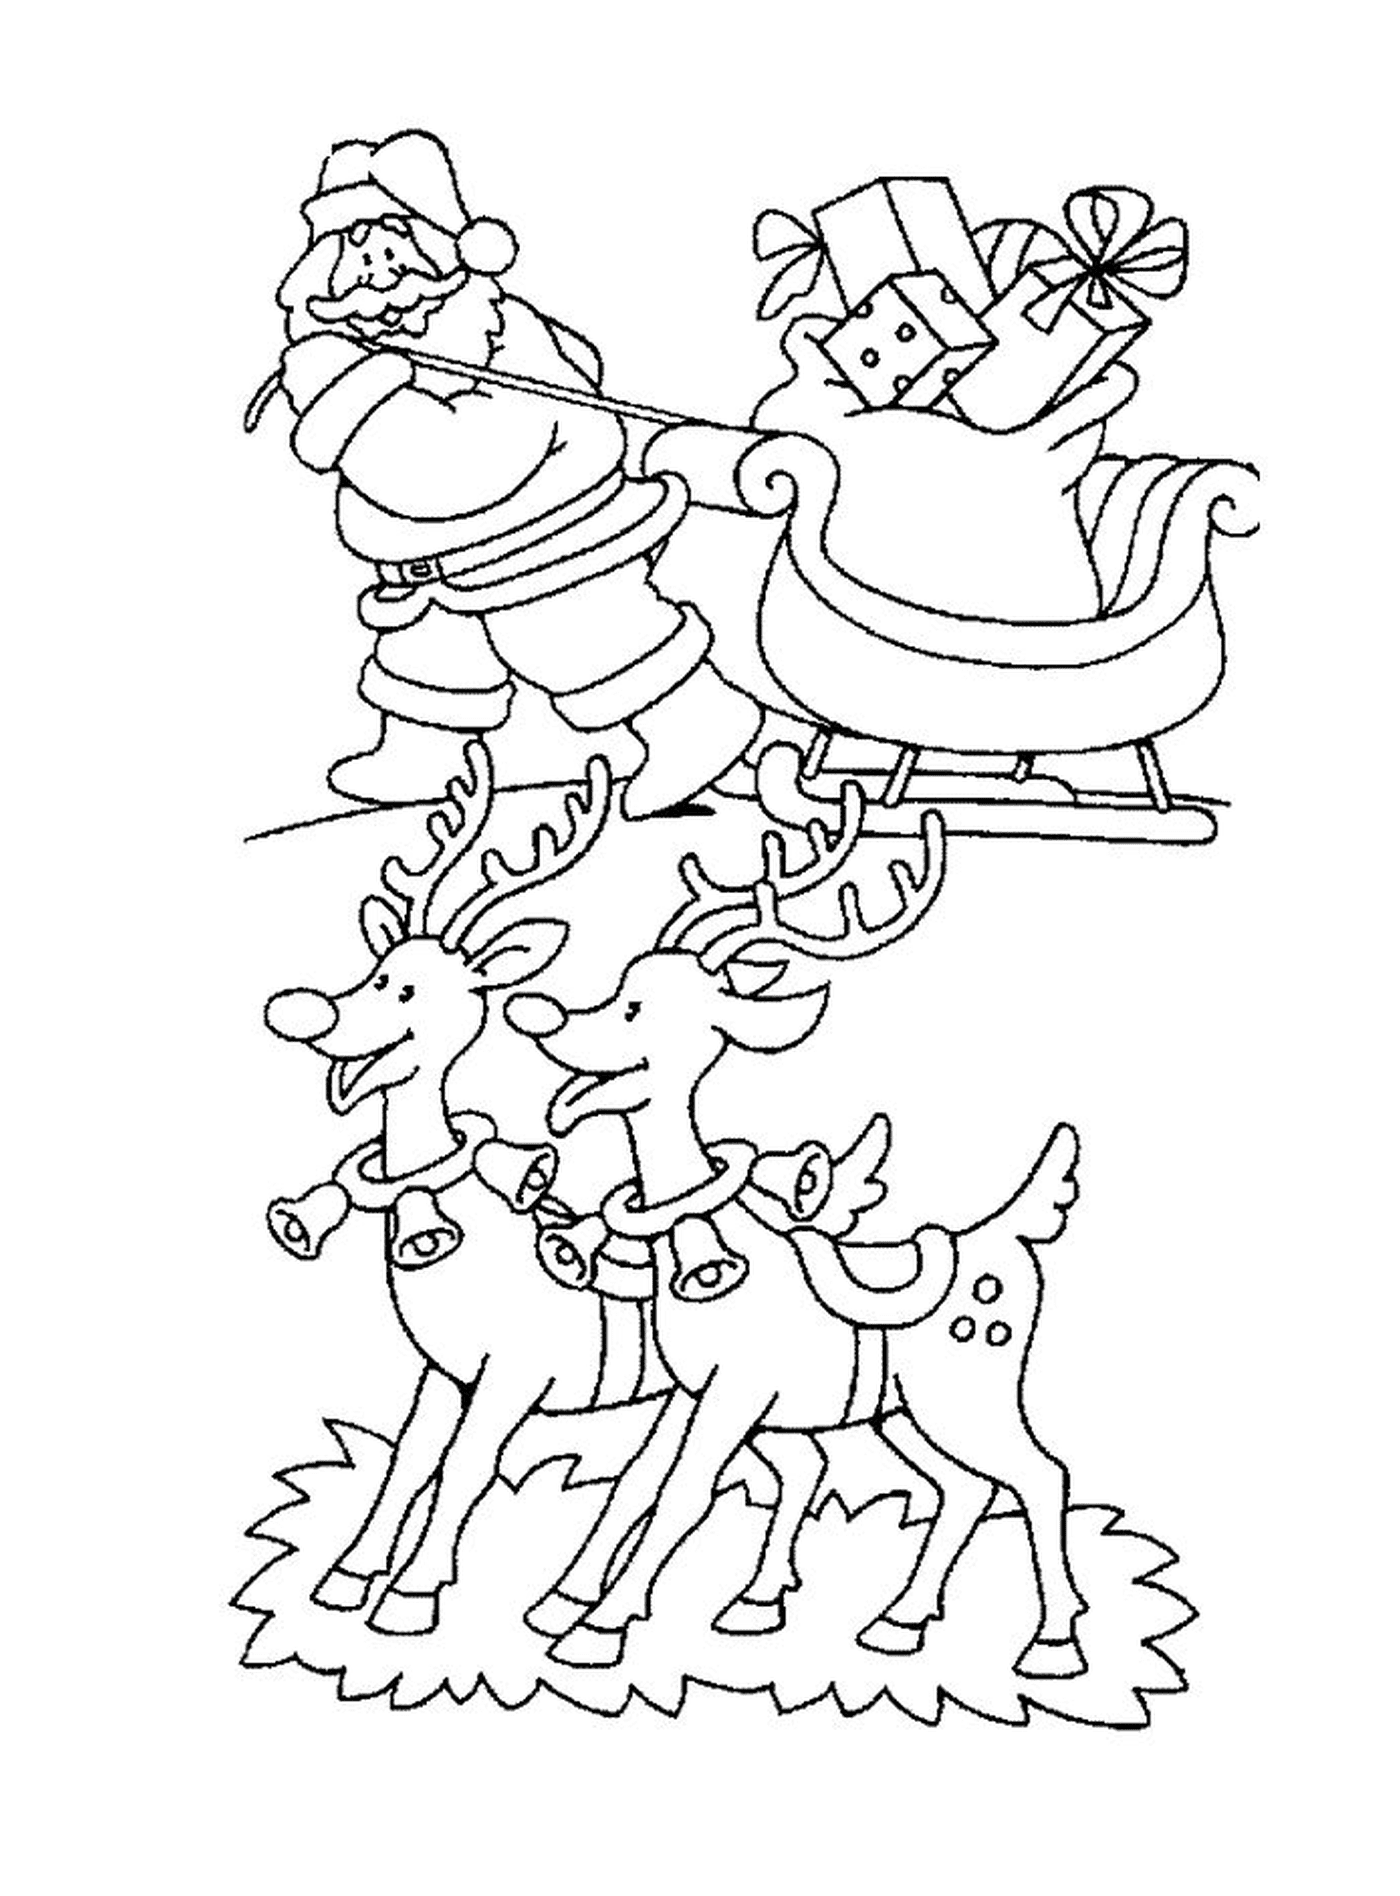  Santa with a sled and reindeer 